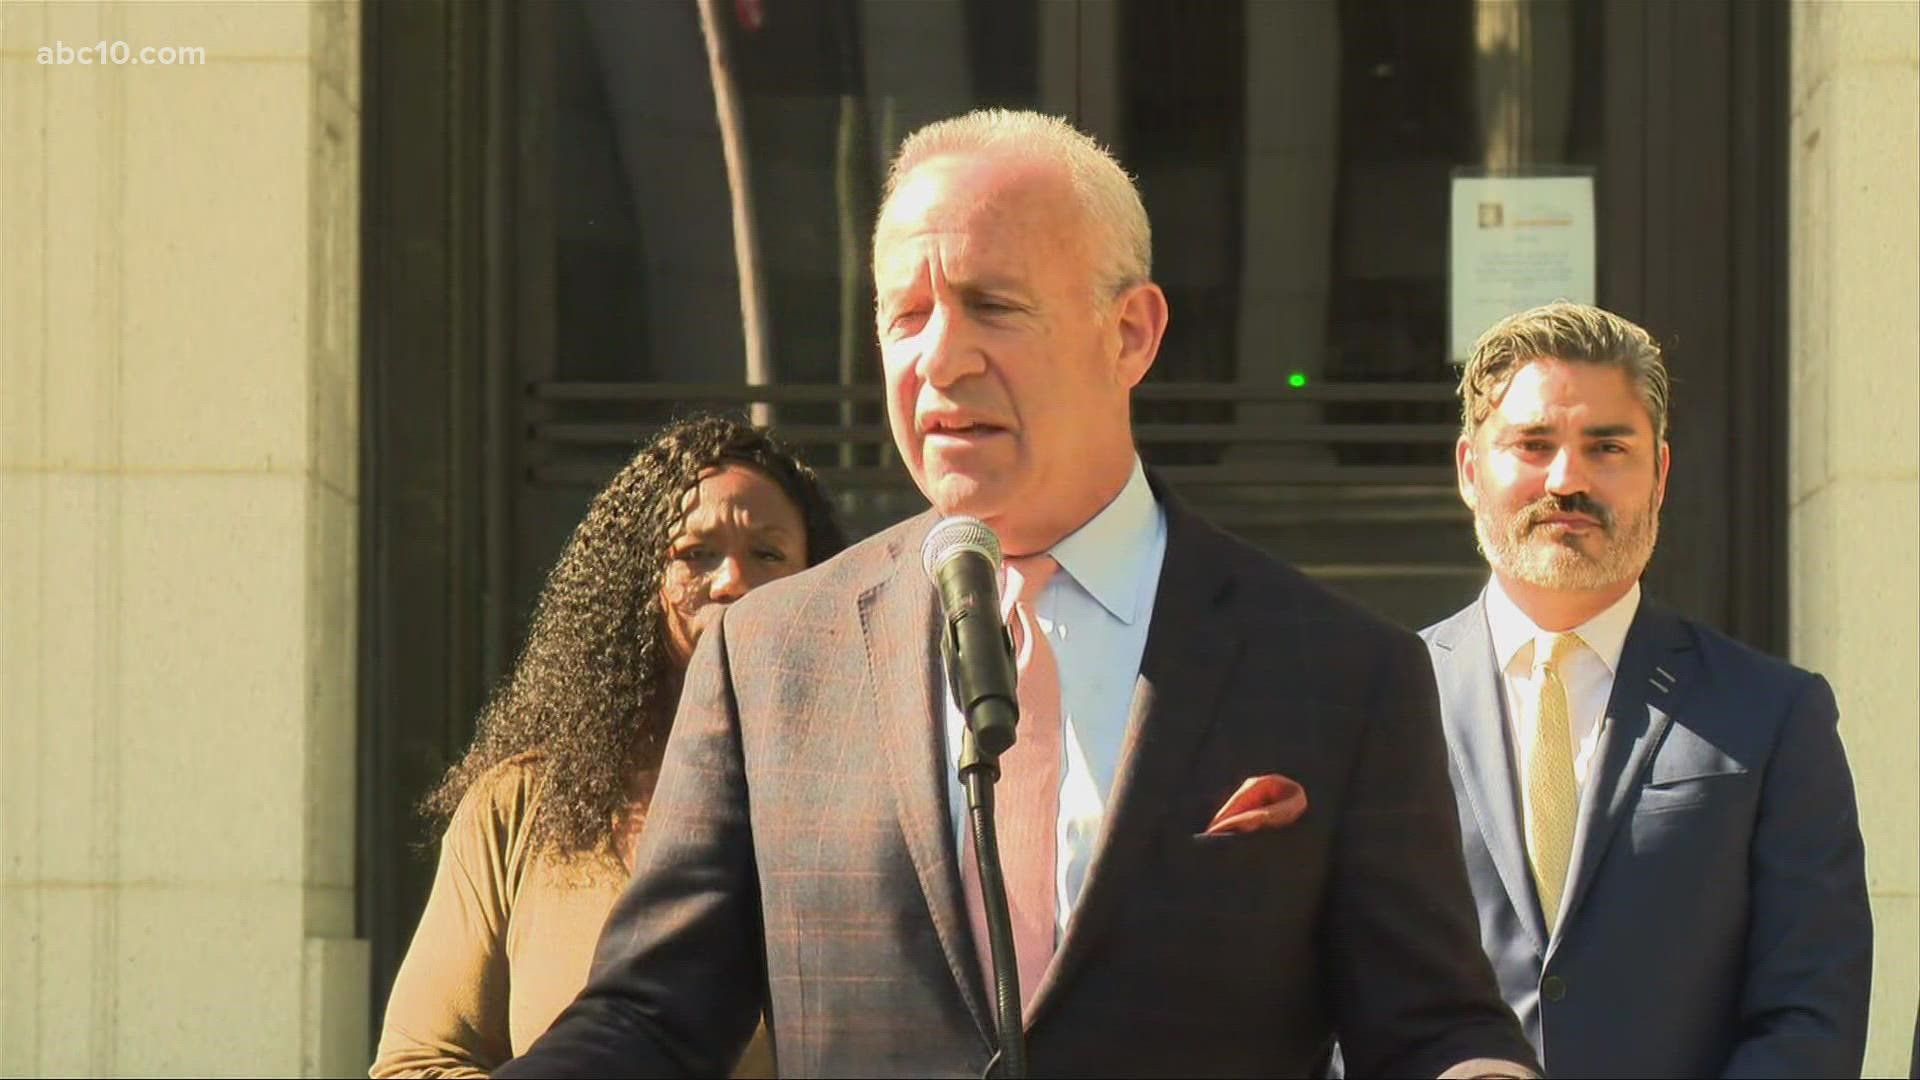 Sending a letter to Gov. Gavin Newsom, leaders like Sacramento Mayor Darrell Steinberg said addressing the root causes of crime needs more funding and attention.